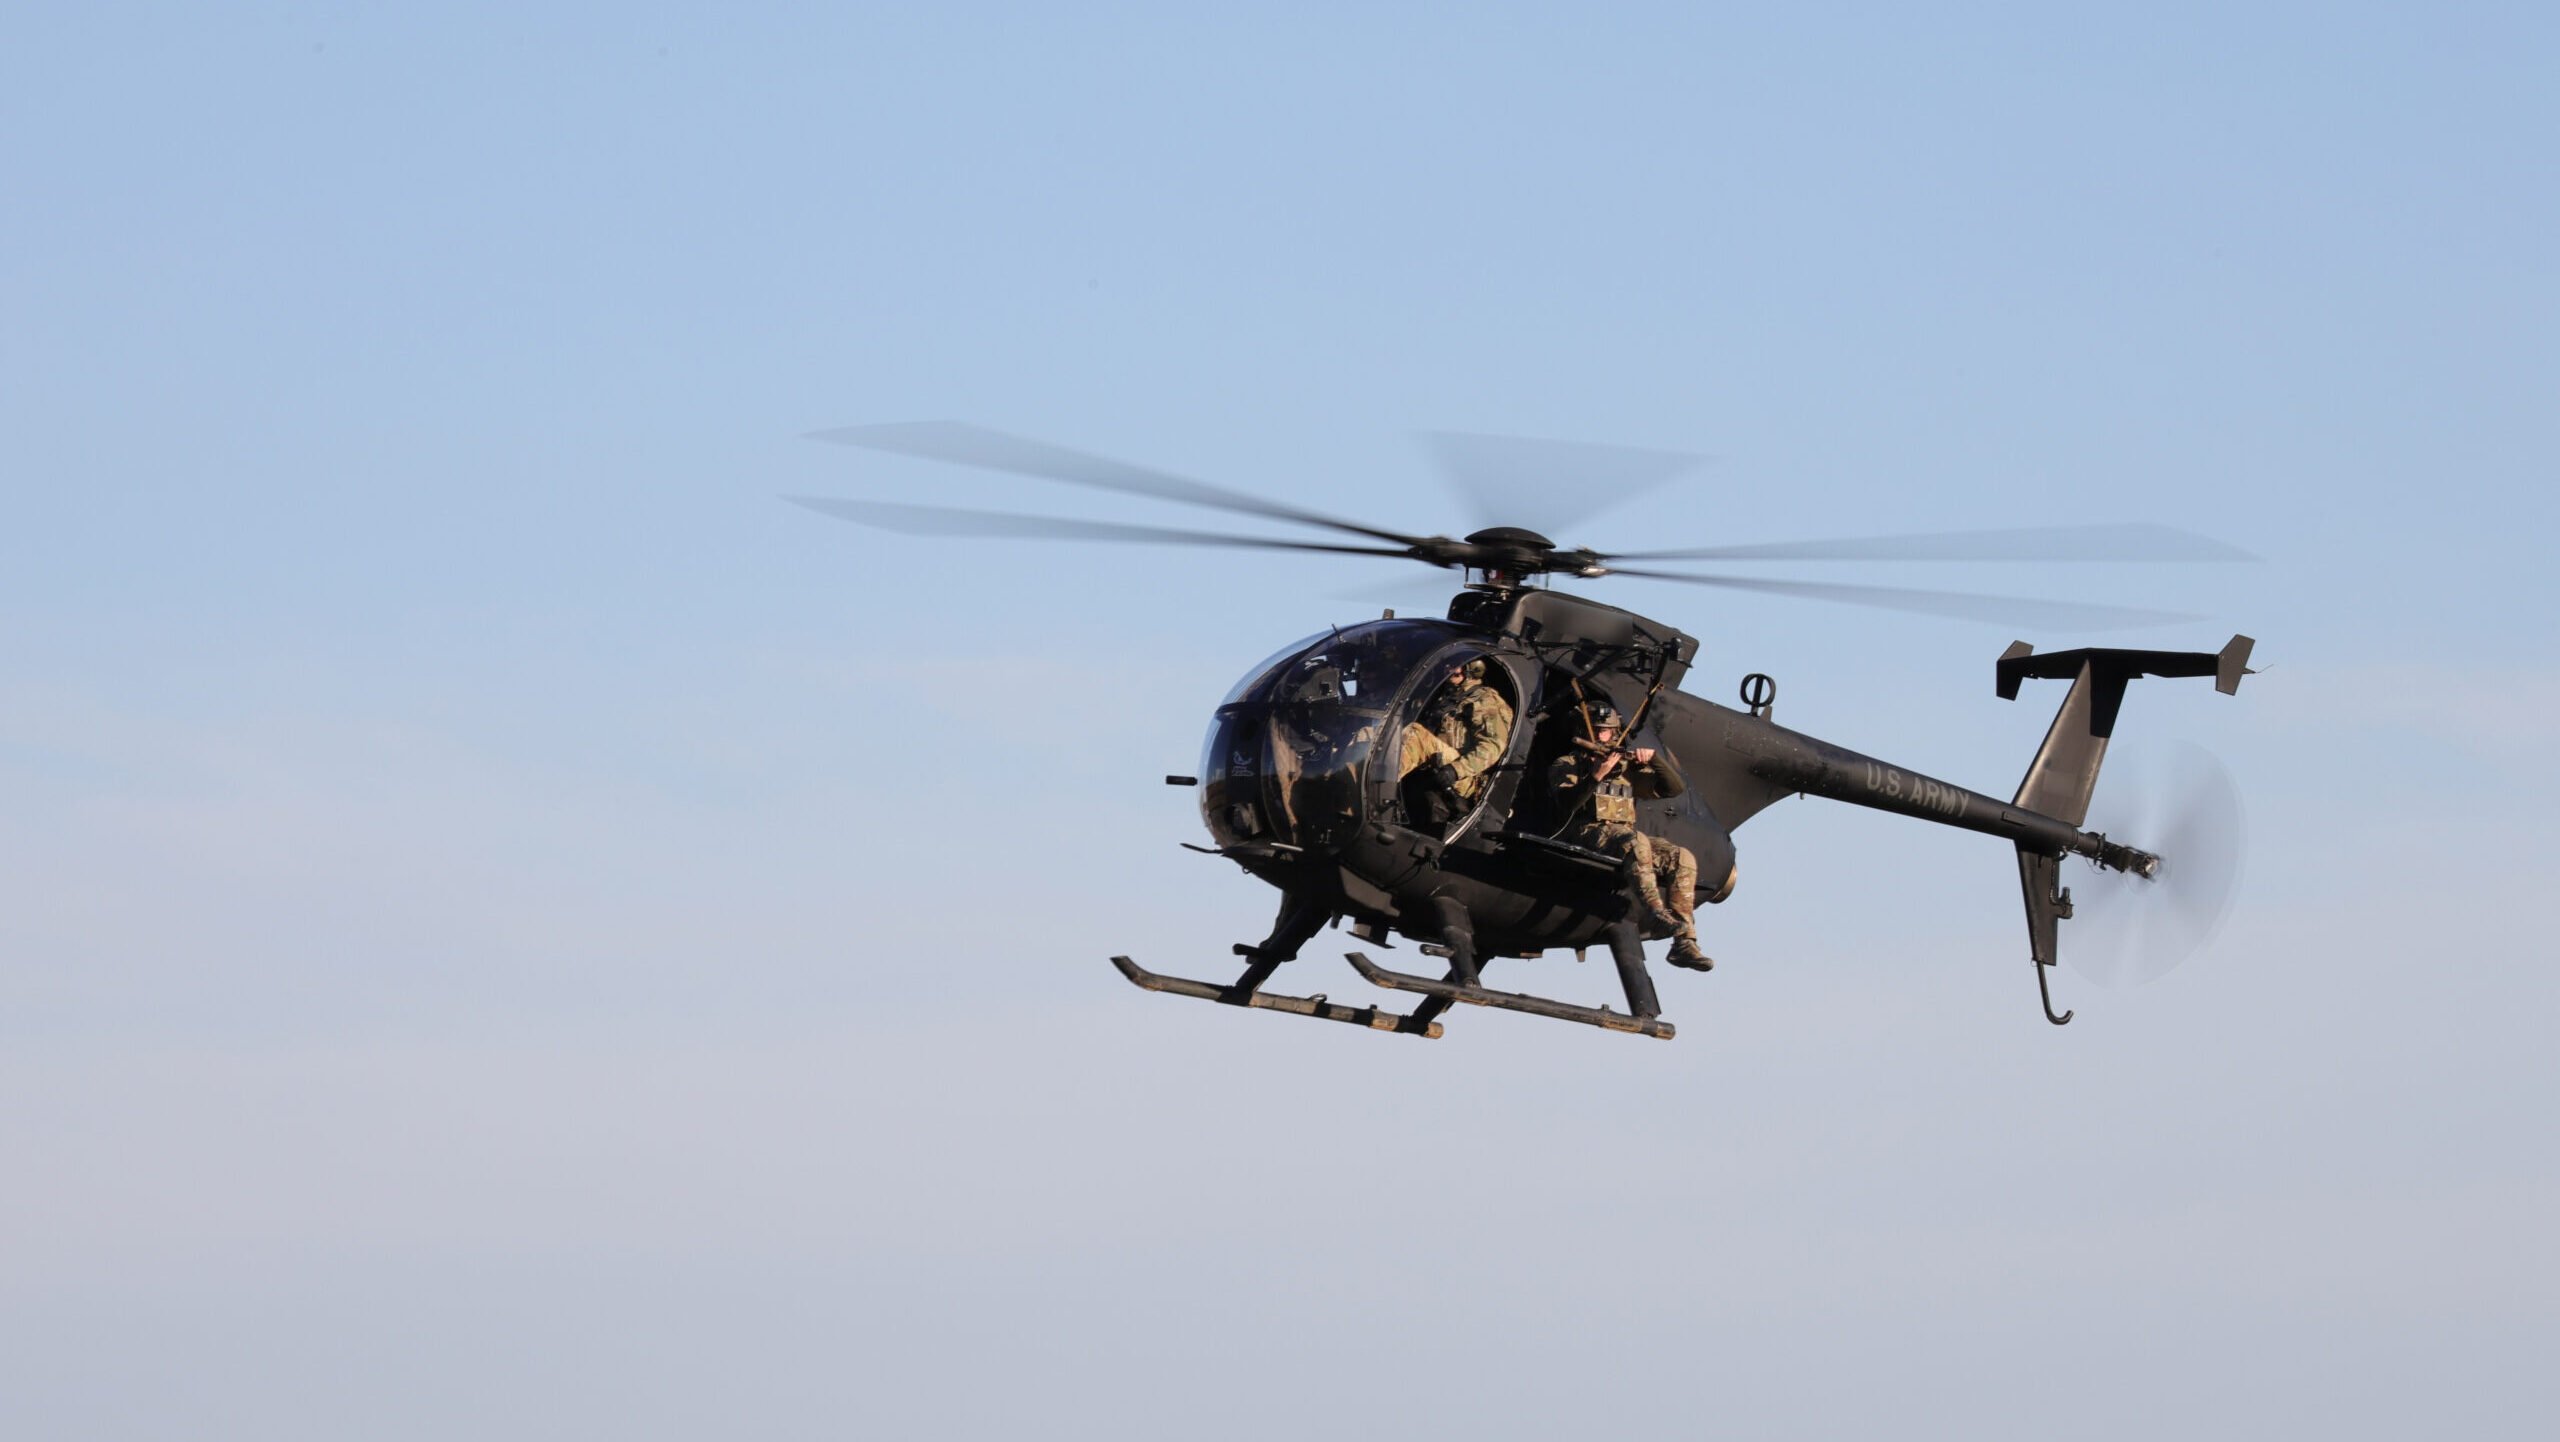 FARA fallout: A ‘resurrection’ of Boeing’s A/MH-6 Little Bird for special forces